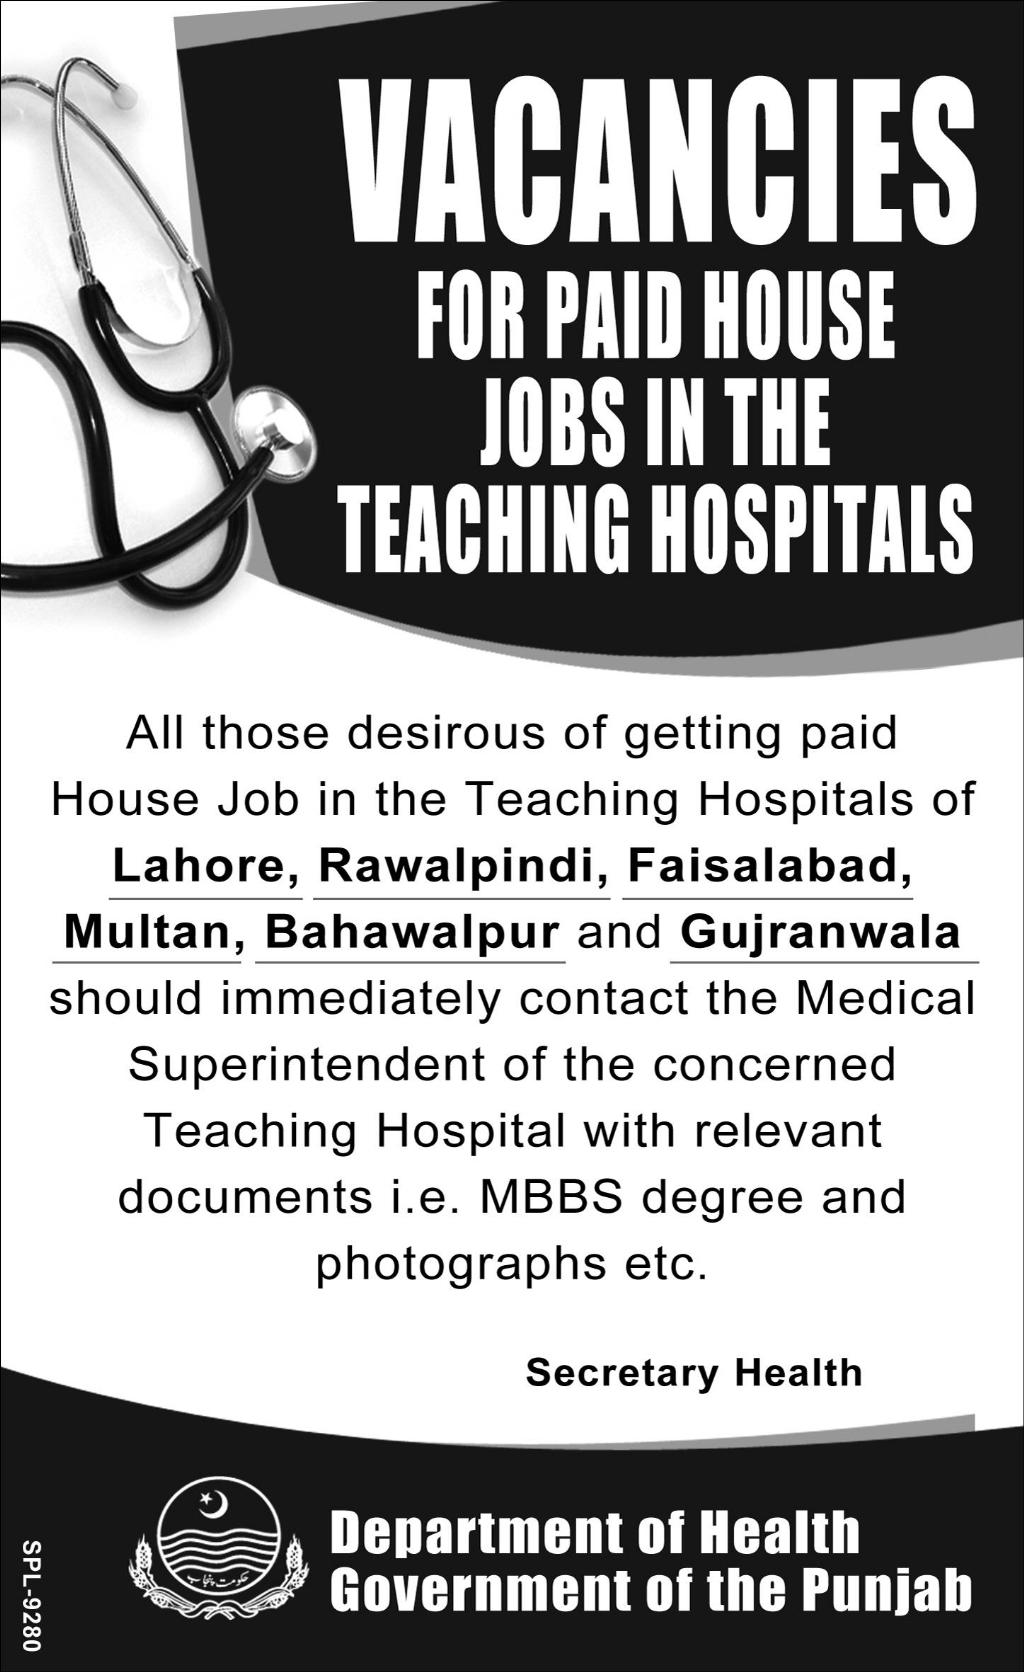 Vacancies for Paid House Jobs in the Teaching Hospitals